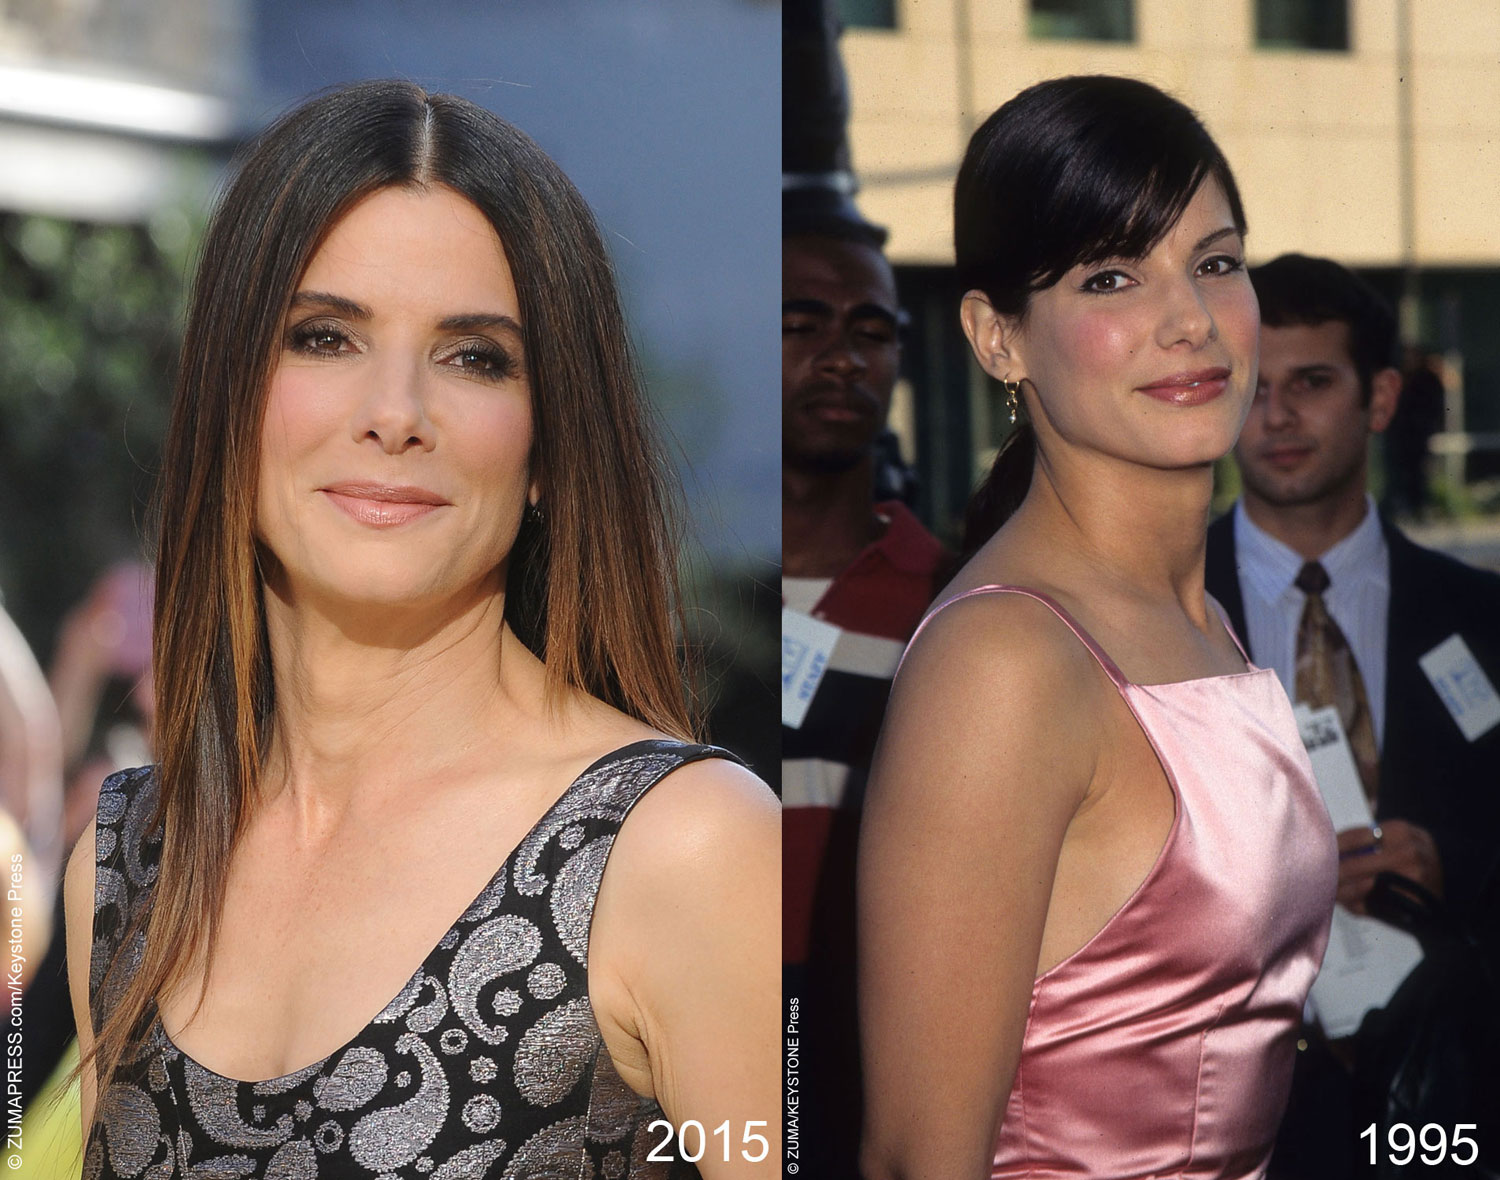 Since her starring role in the 1991 hit movie Speed opposite Keanu Reeves, Sandra Bullock doesn’t appear to have aged much at all. The Oscar winner (for her role in The Blind Side) has looked almost the same age for over 20 years.